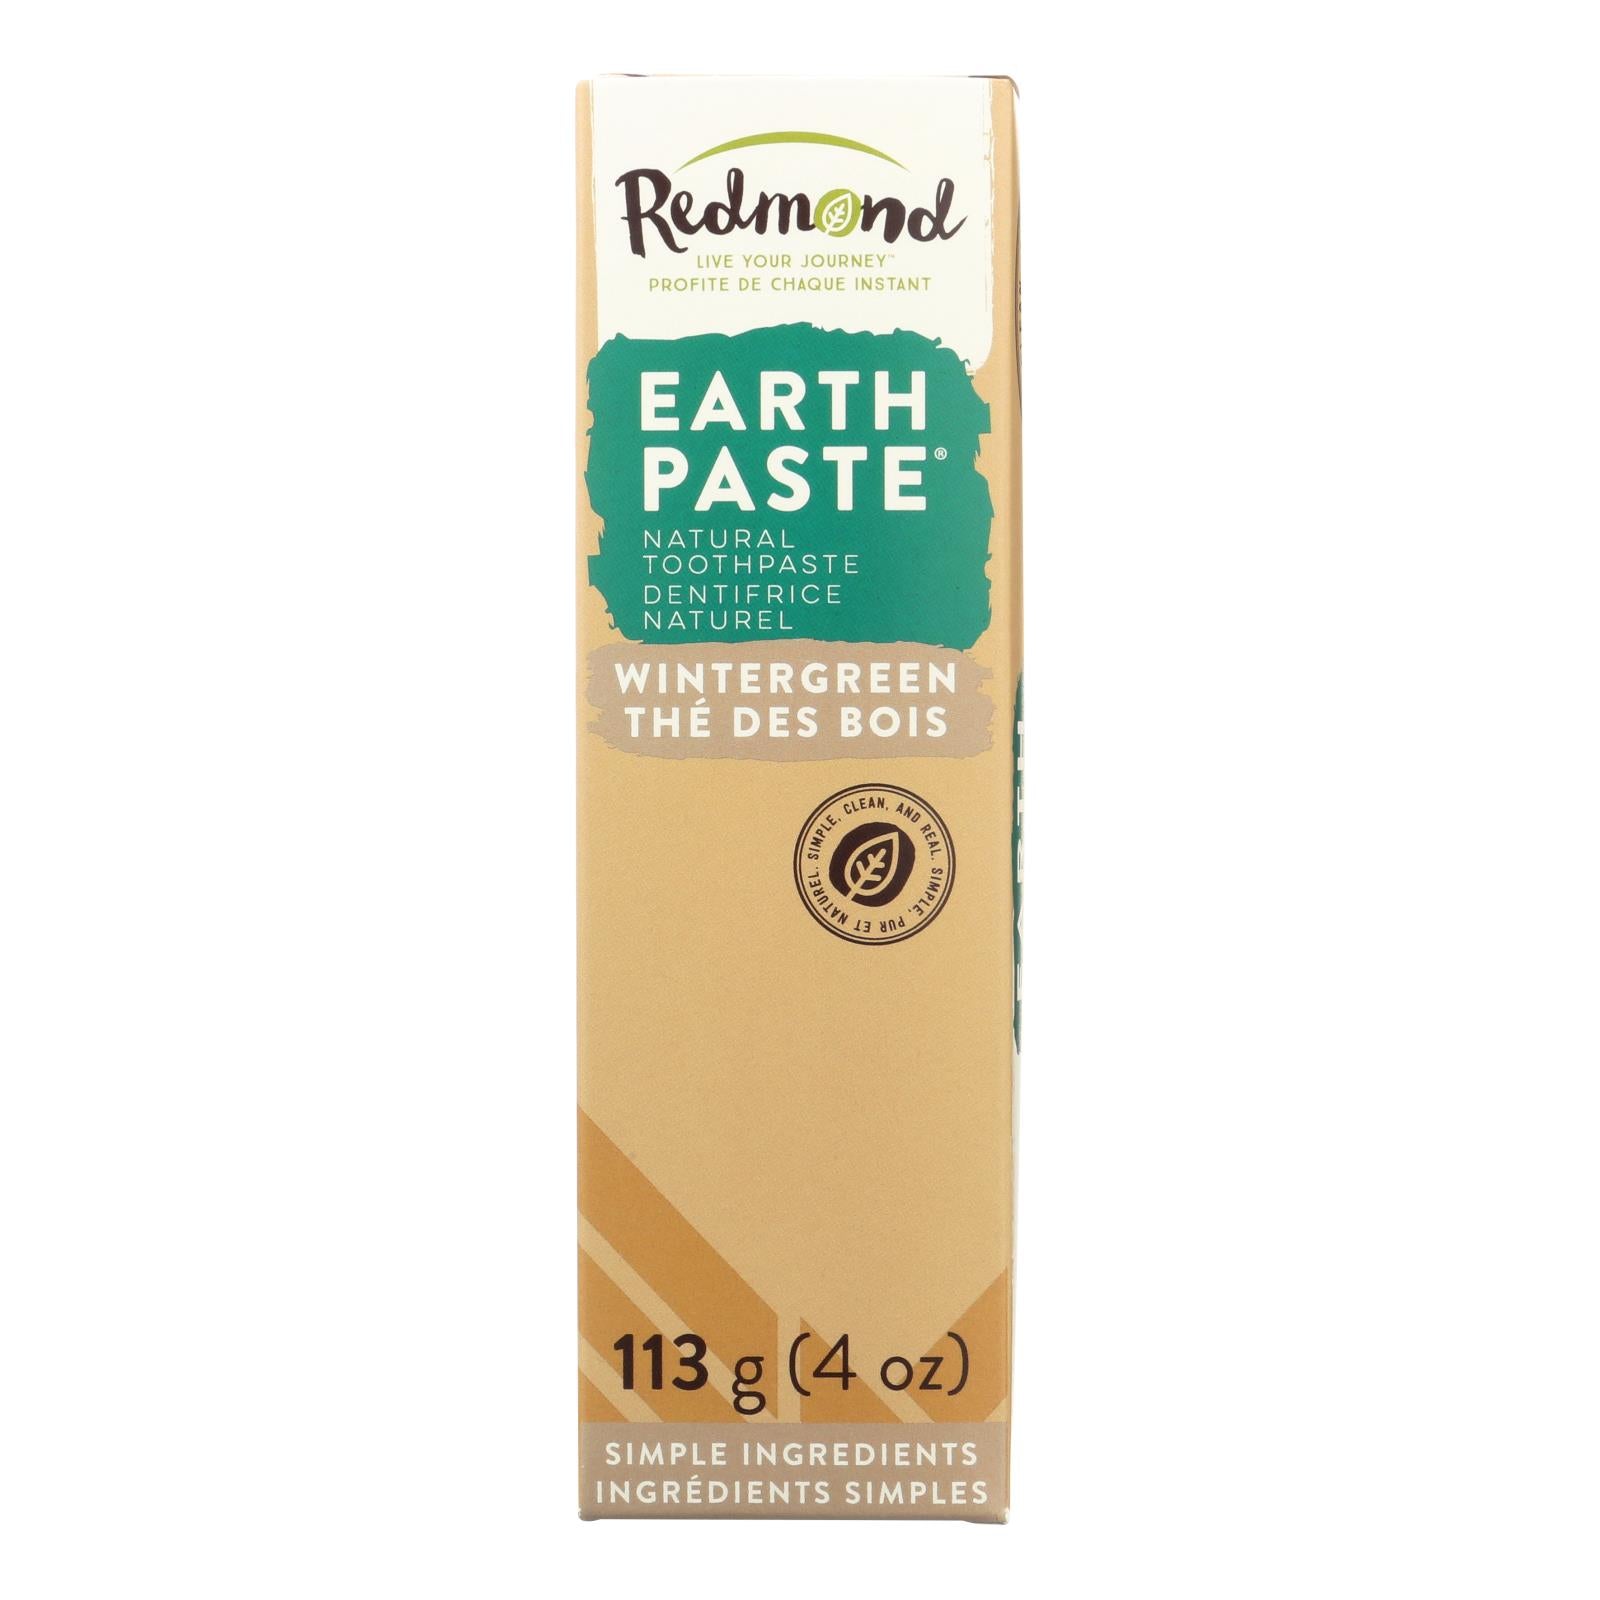 Redmond Trading Company Earthpaste Natural Toothpaste Wintergreen - 4 Oz